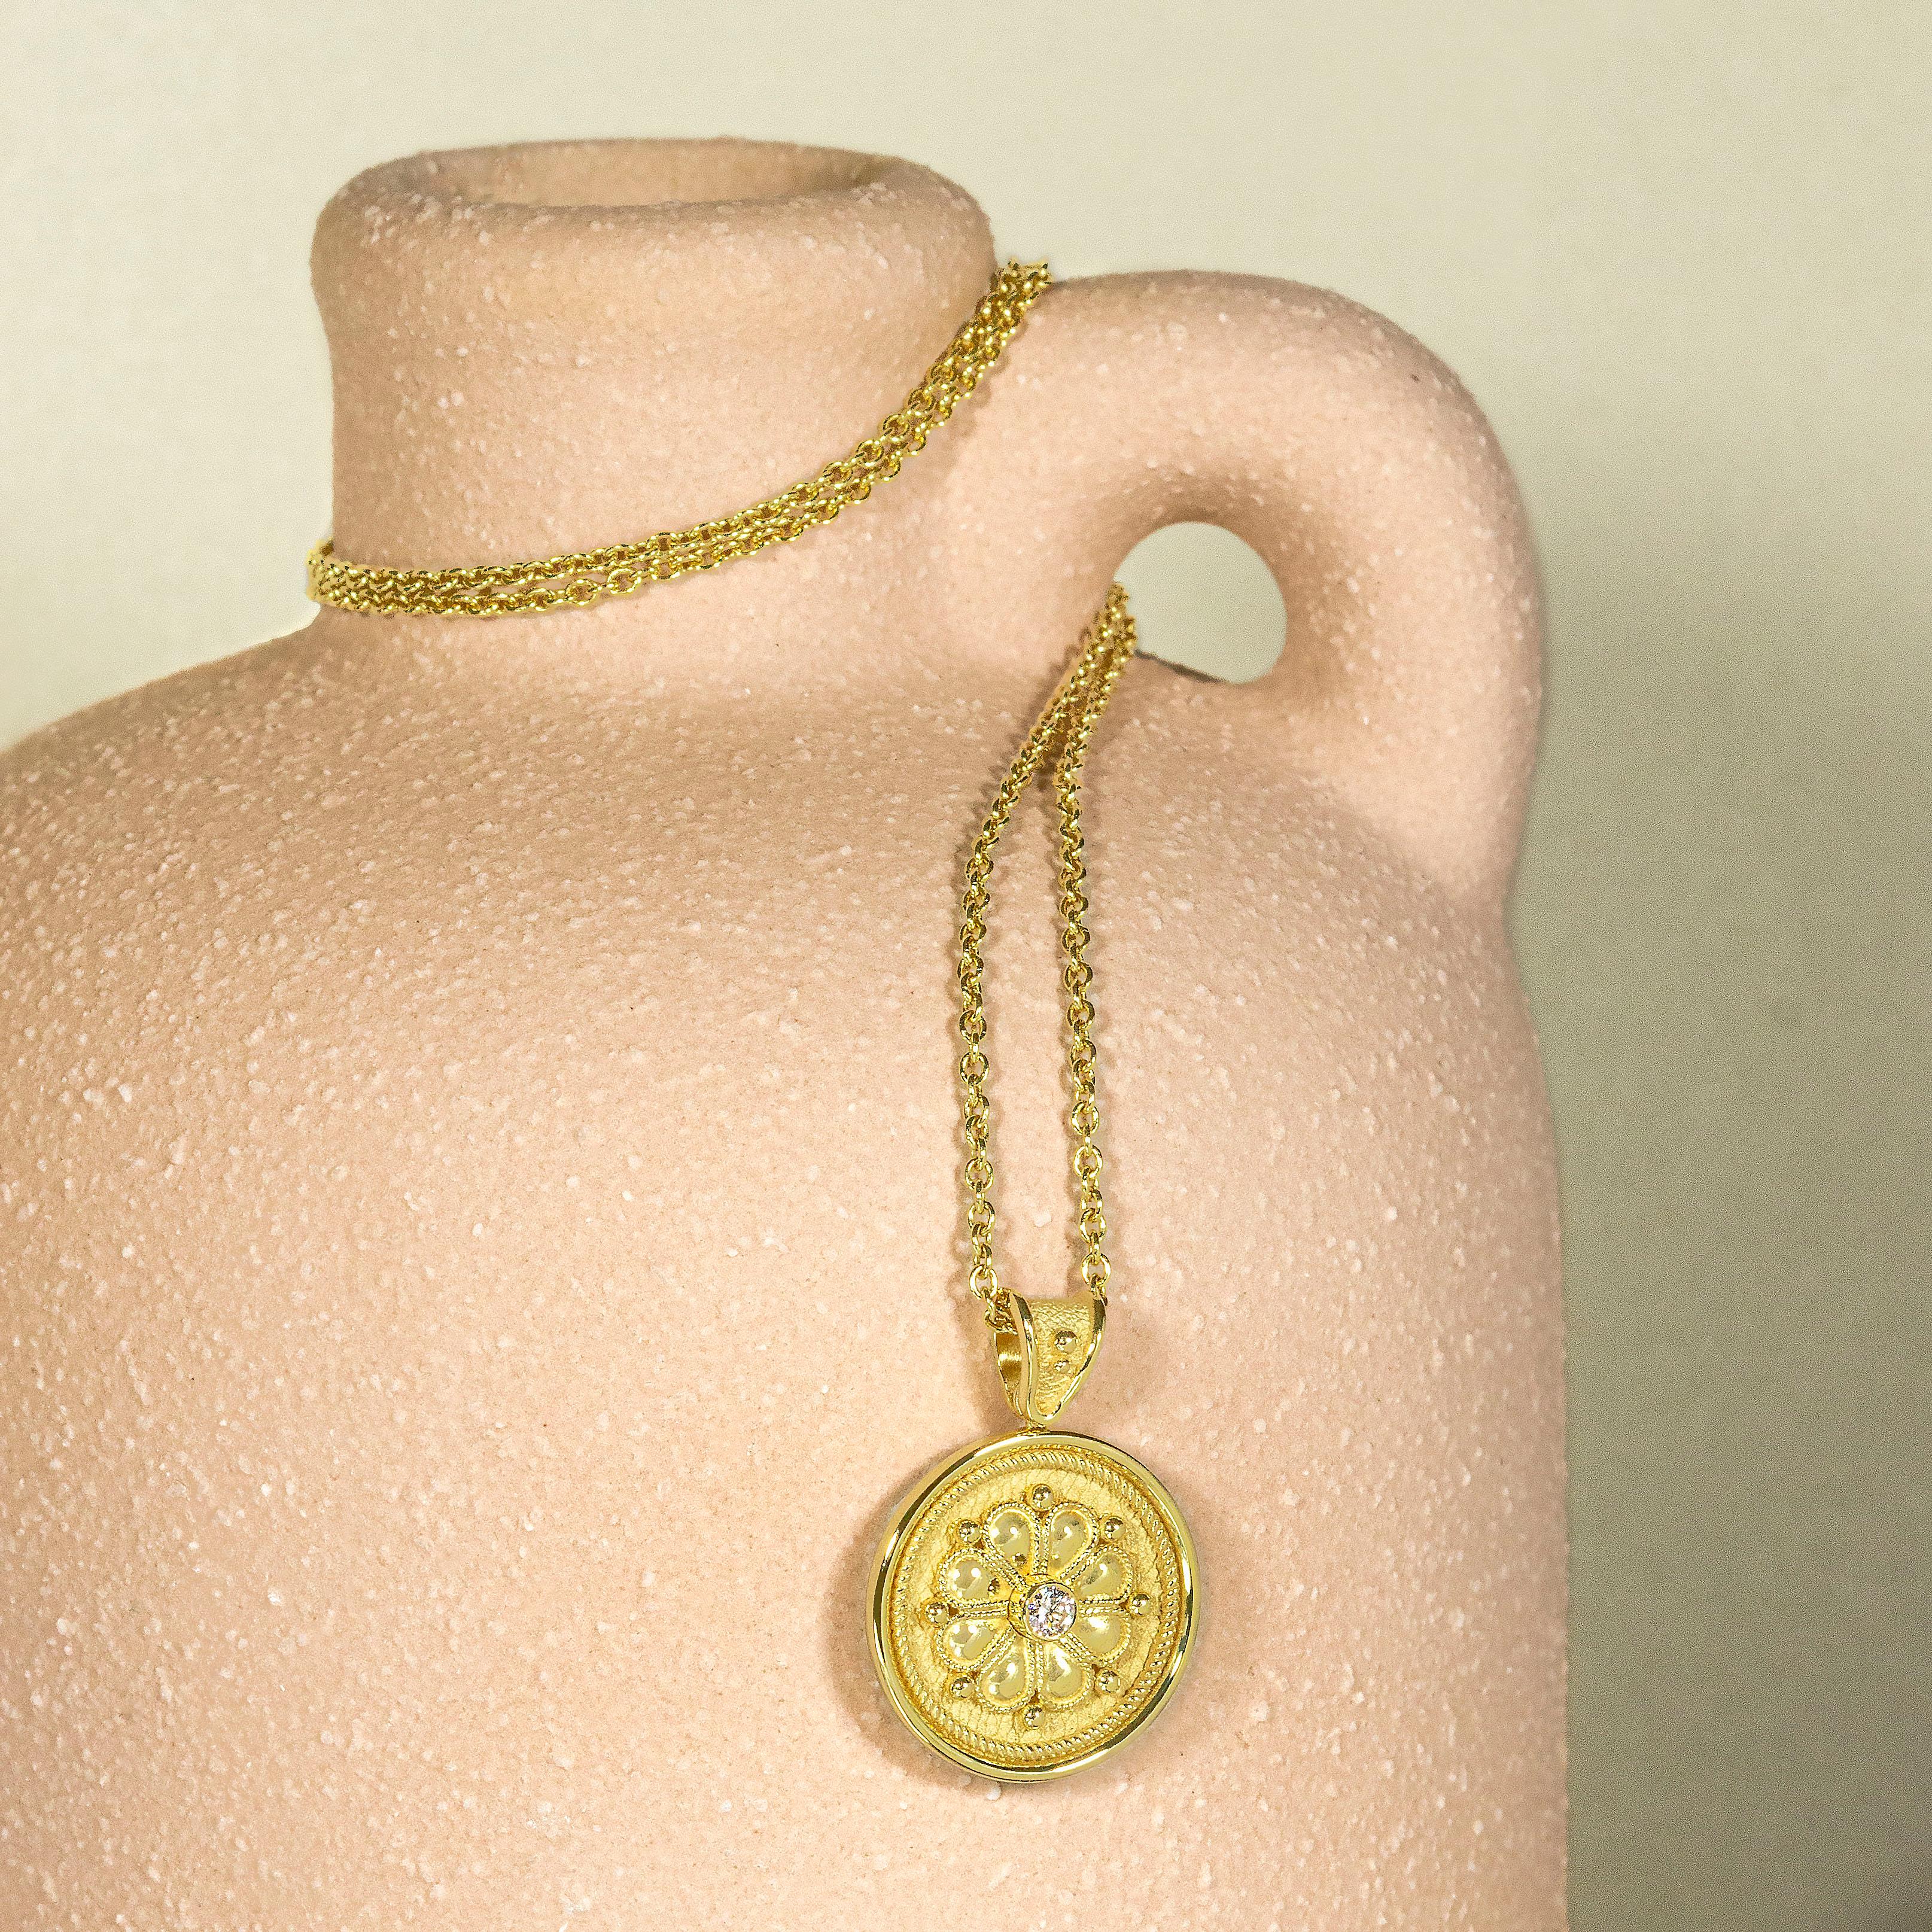 Brilliant Cut Gold Byzantine Round Flower Pendant with Diamond For Sale